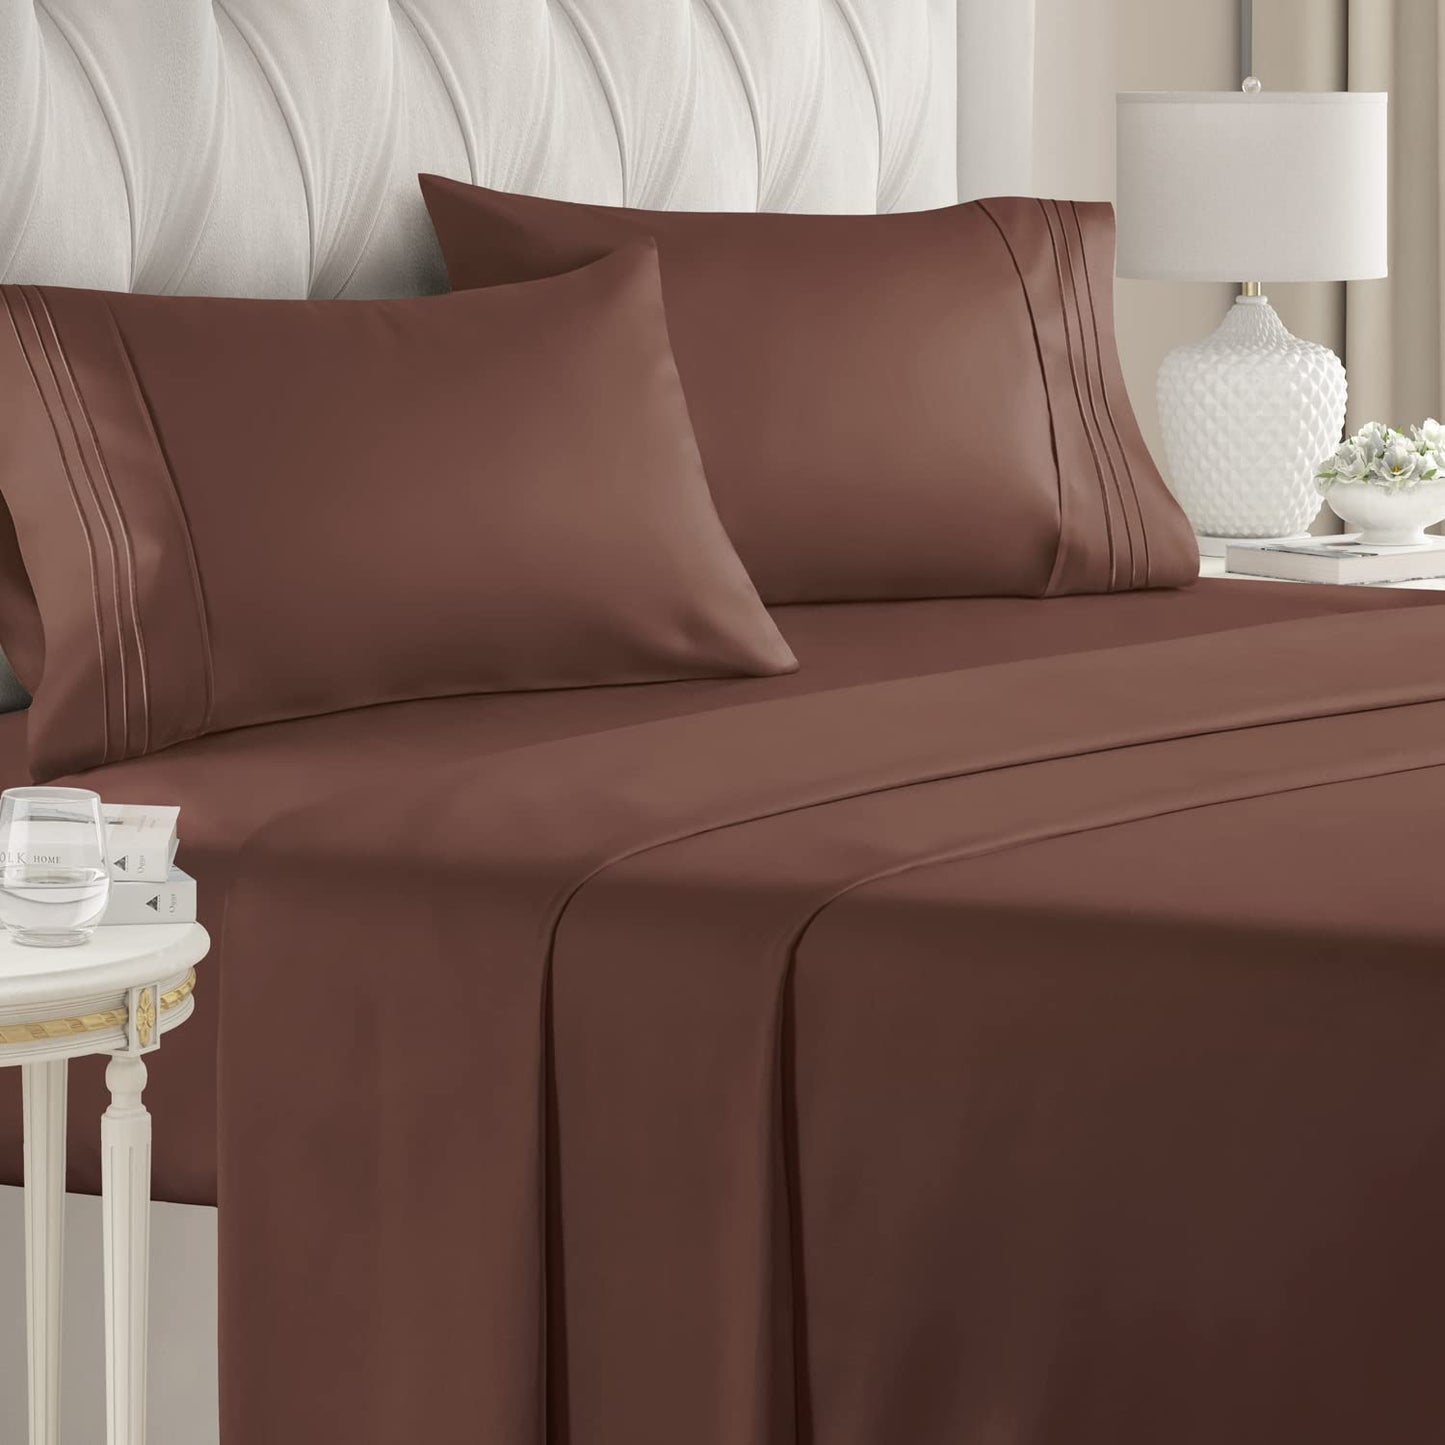 Buy 1500 Thread Count Solid Chocolate Sheet Set Egyptian Cotton at- Egyptianhomelinens.com